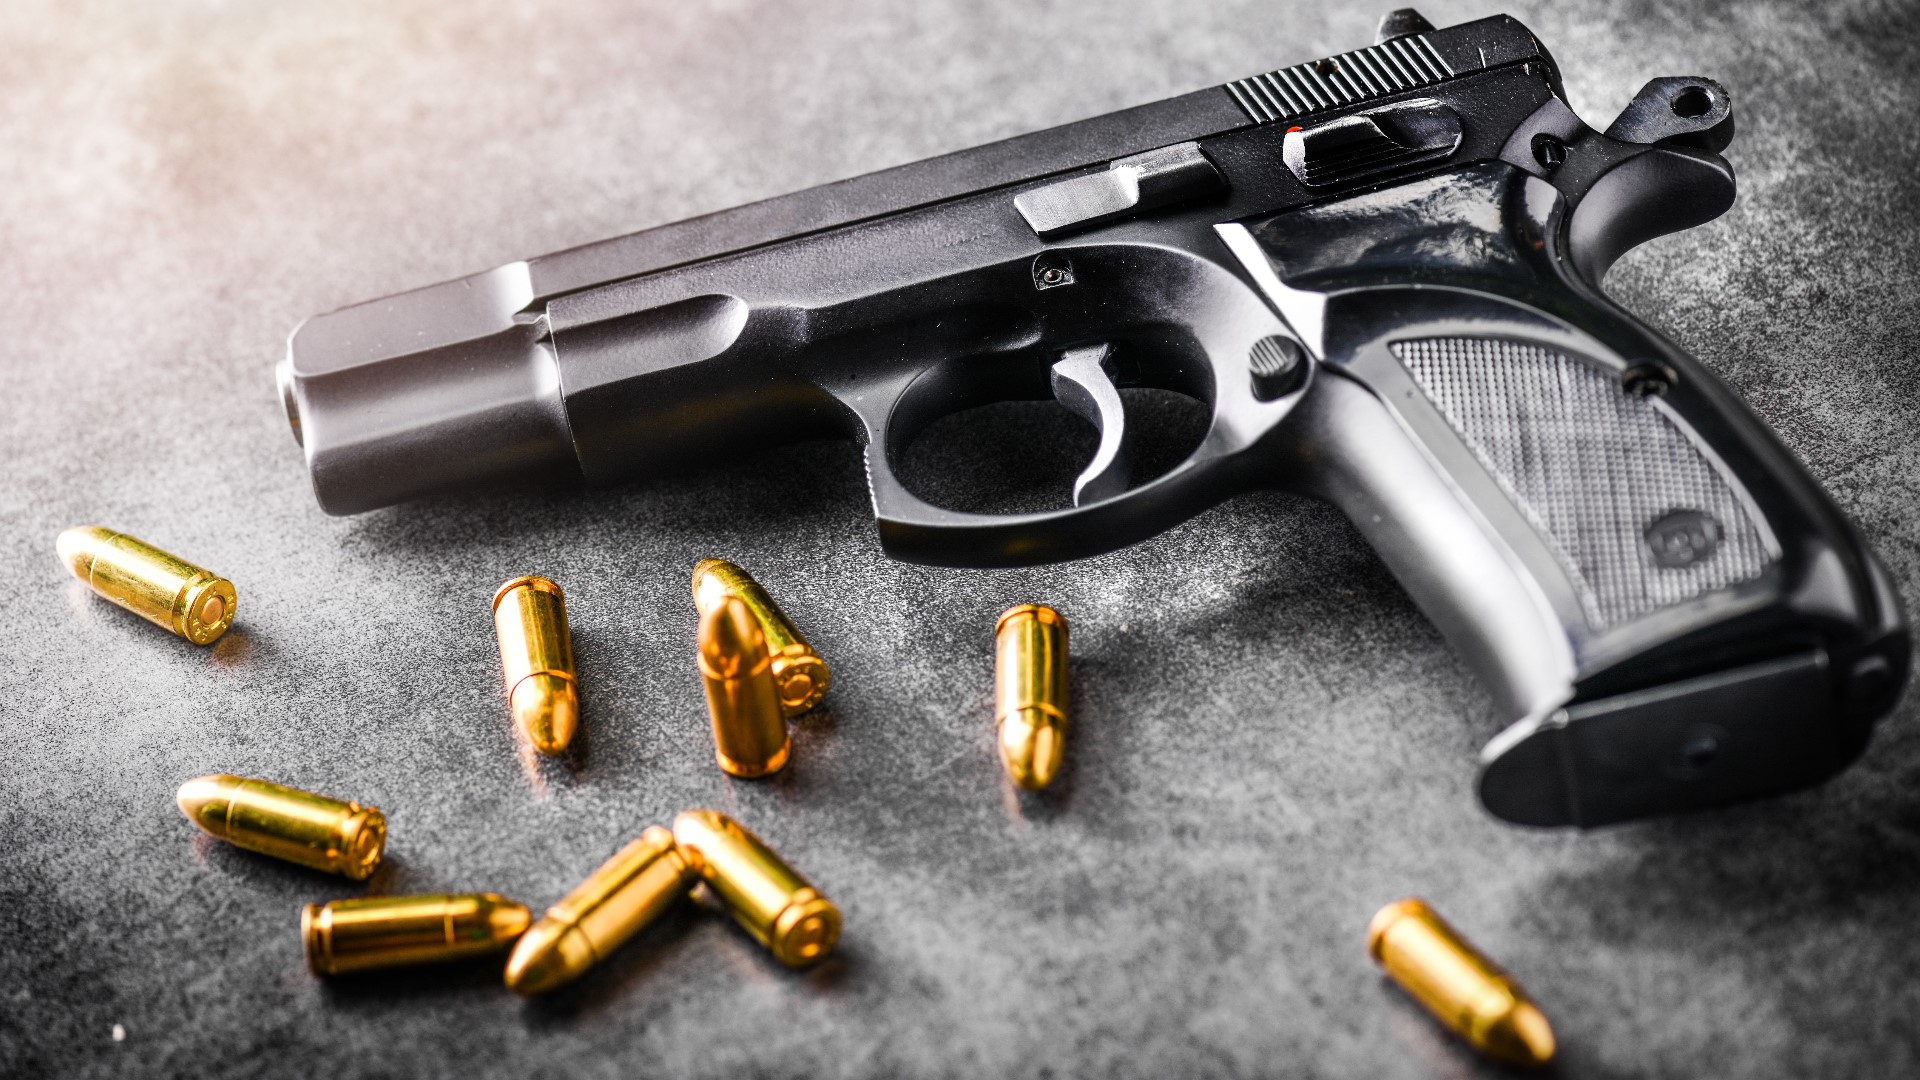 If you don't lock up your gun in DeKalb County, a commissioner there wants you to pay.